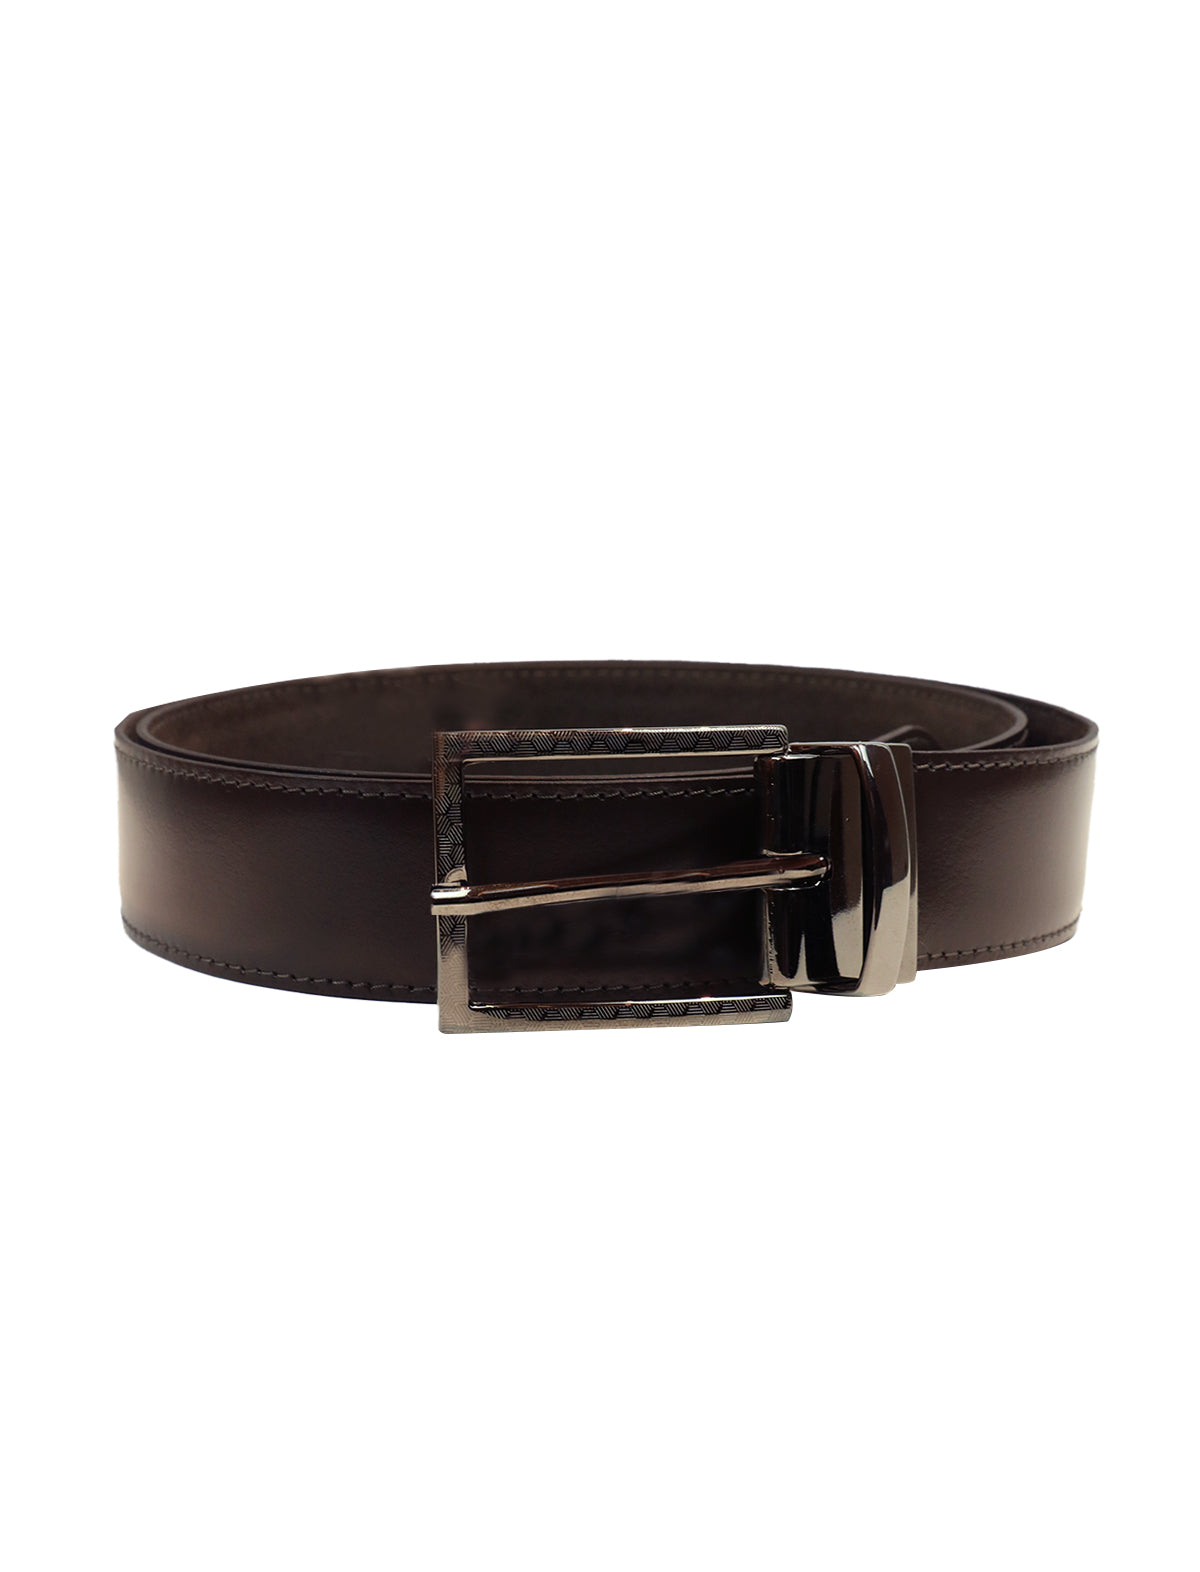 Andrea d'Amico Reversible Suede Leather Belt in Brown